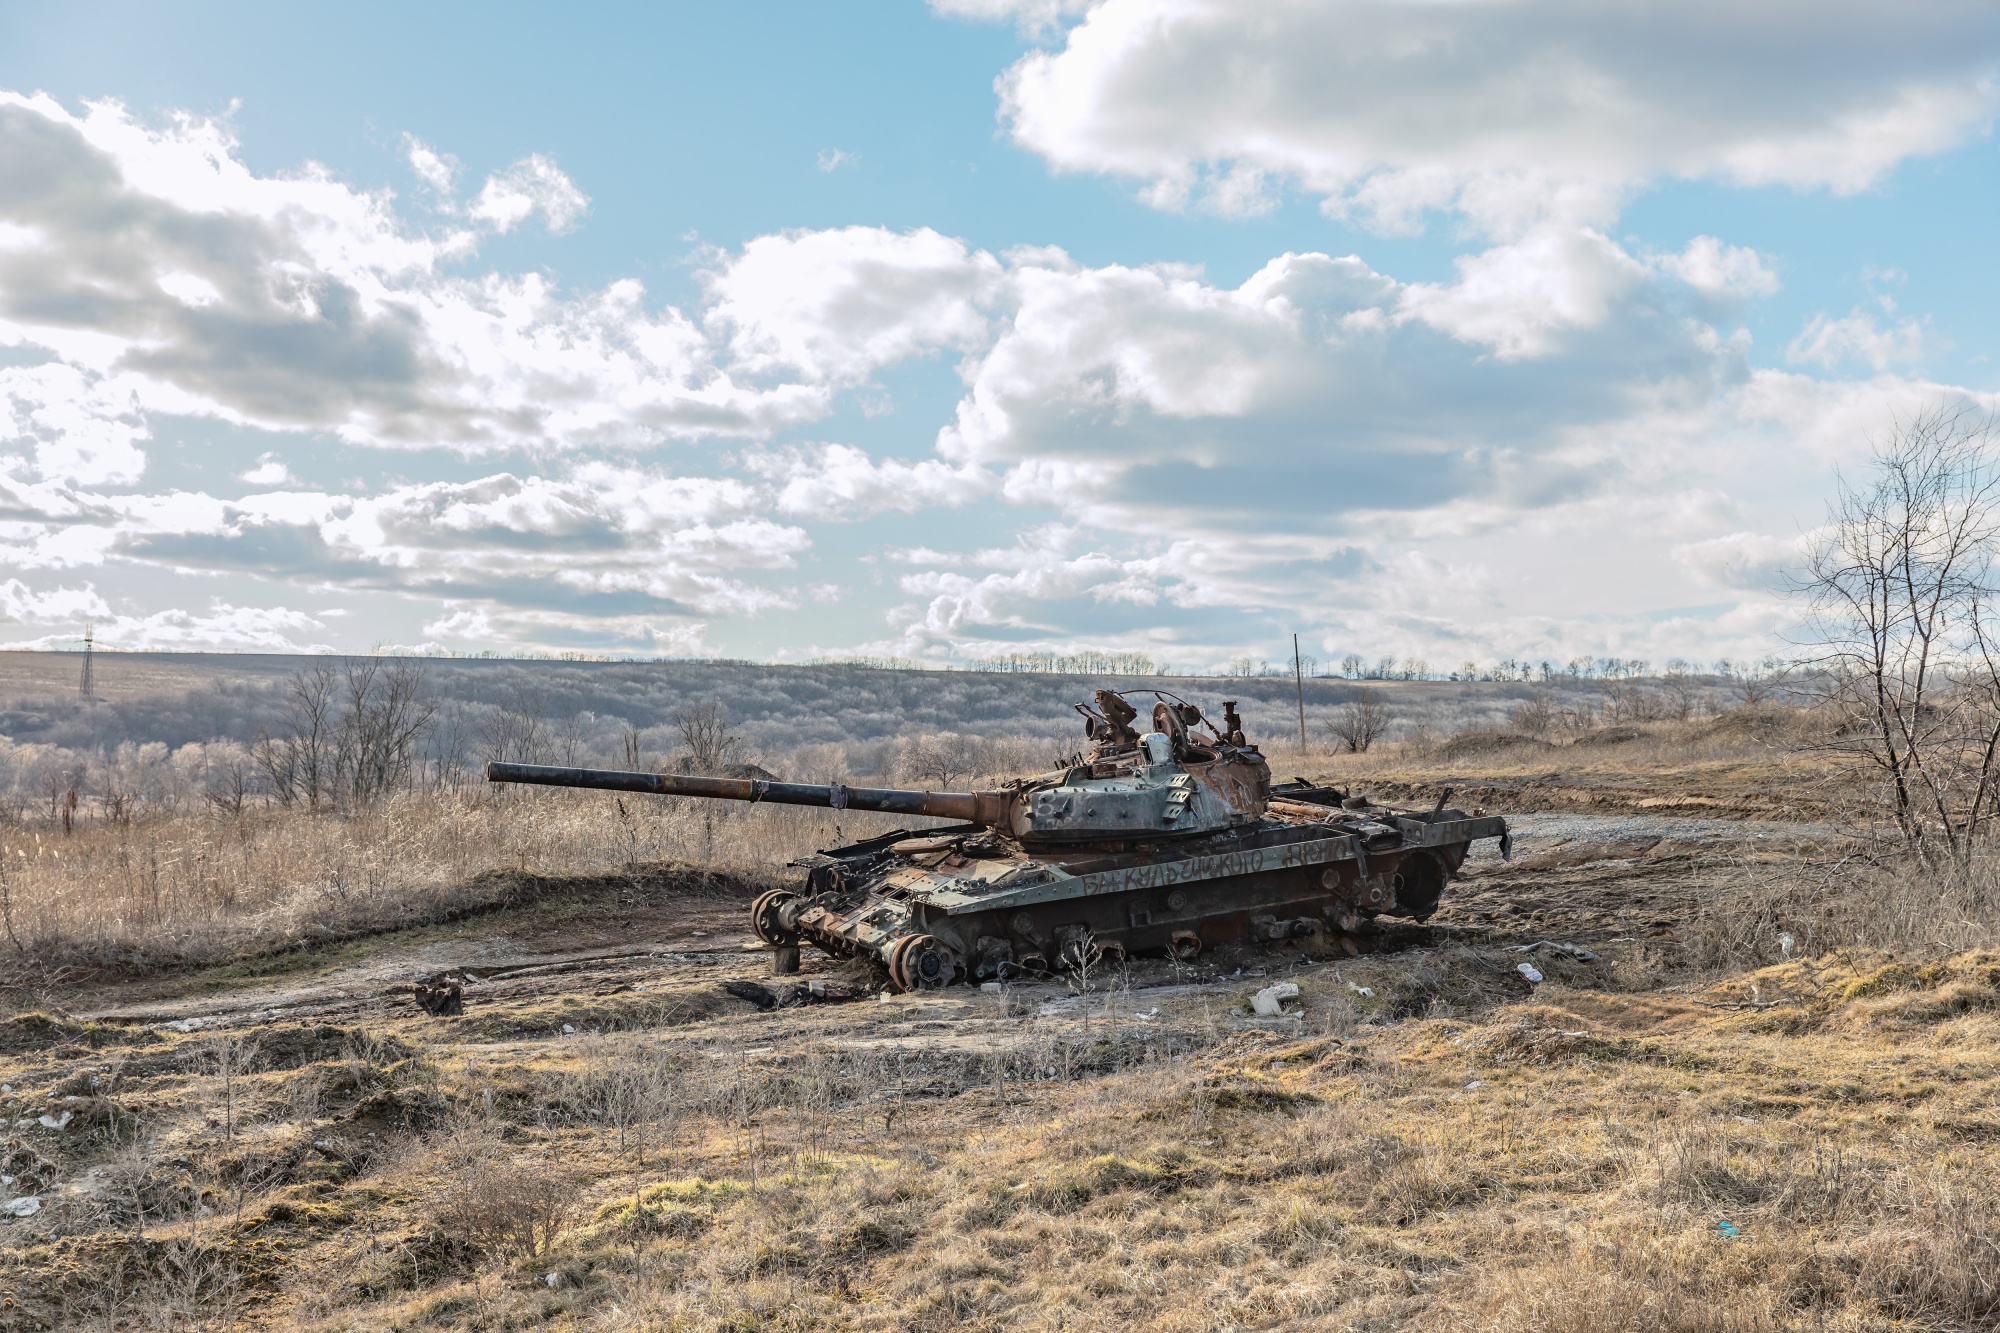 A destroyed Russian tank near Kharkiv. Ukrainian officials see limits to Russia’s ability to keep fighting as it runs down stocks of weapons.